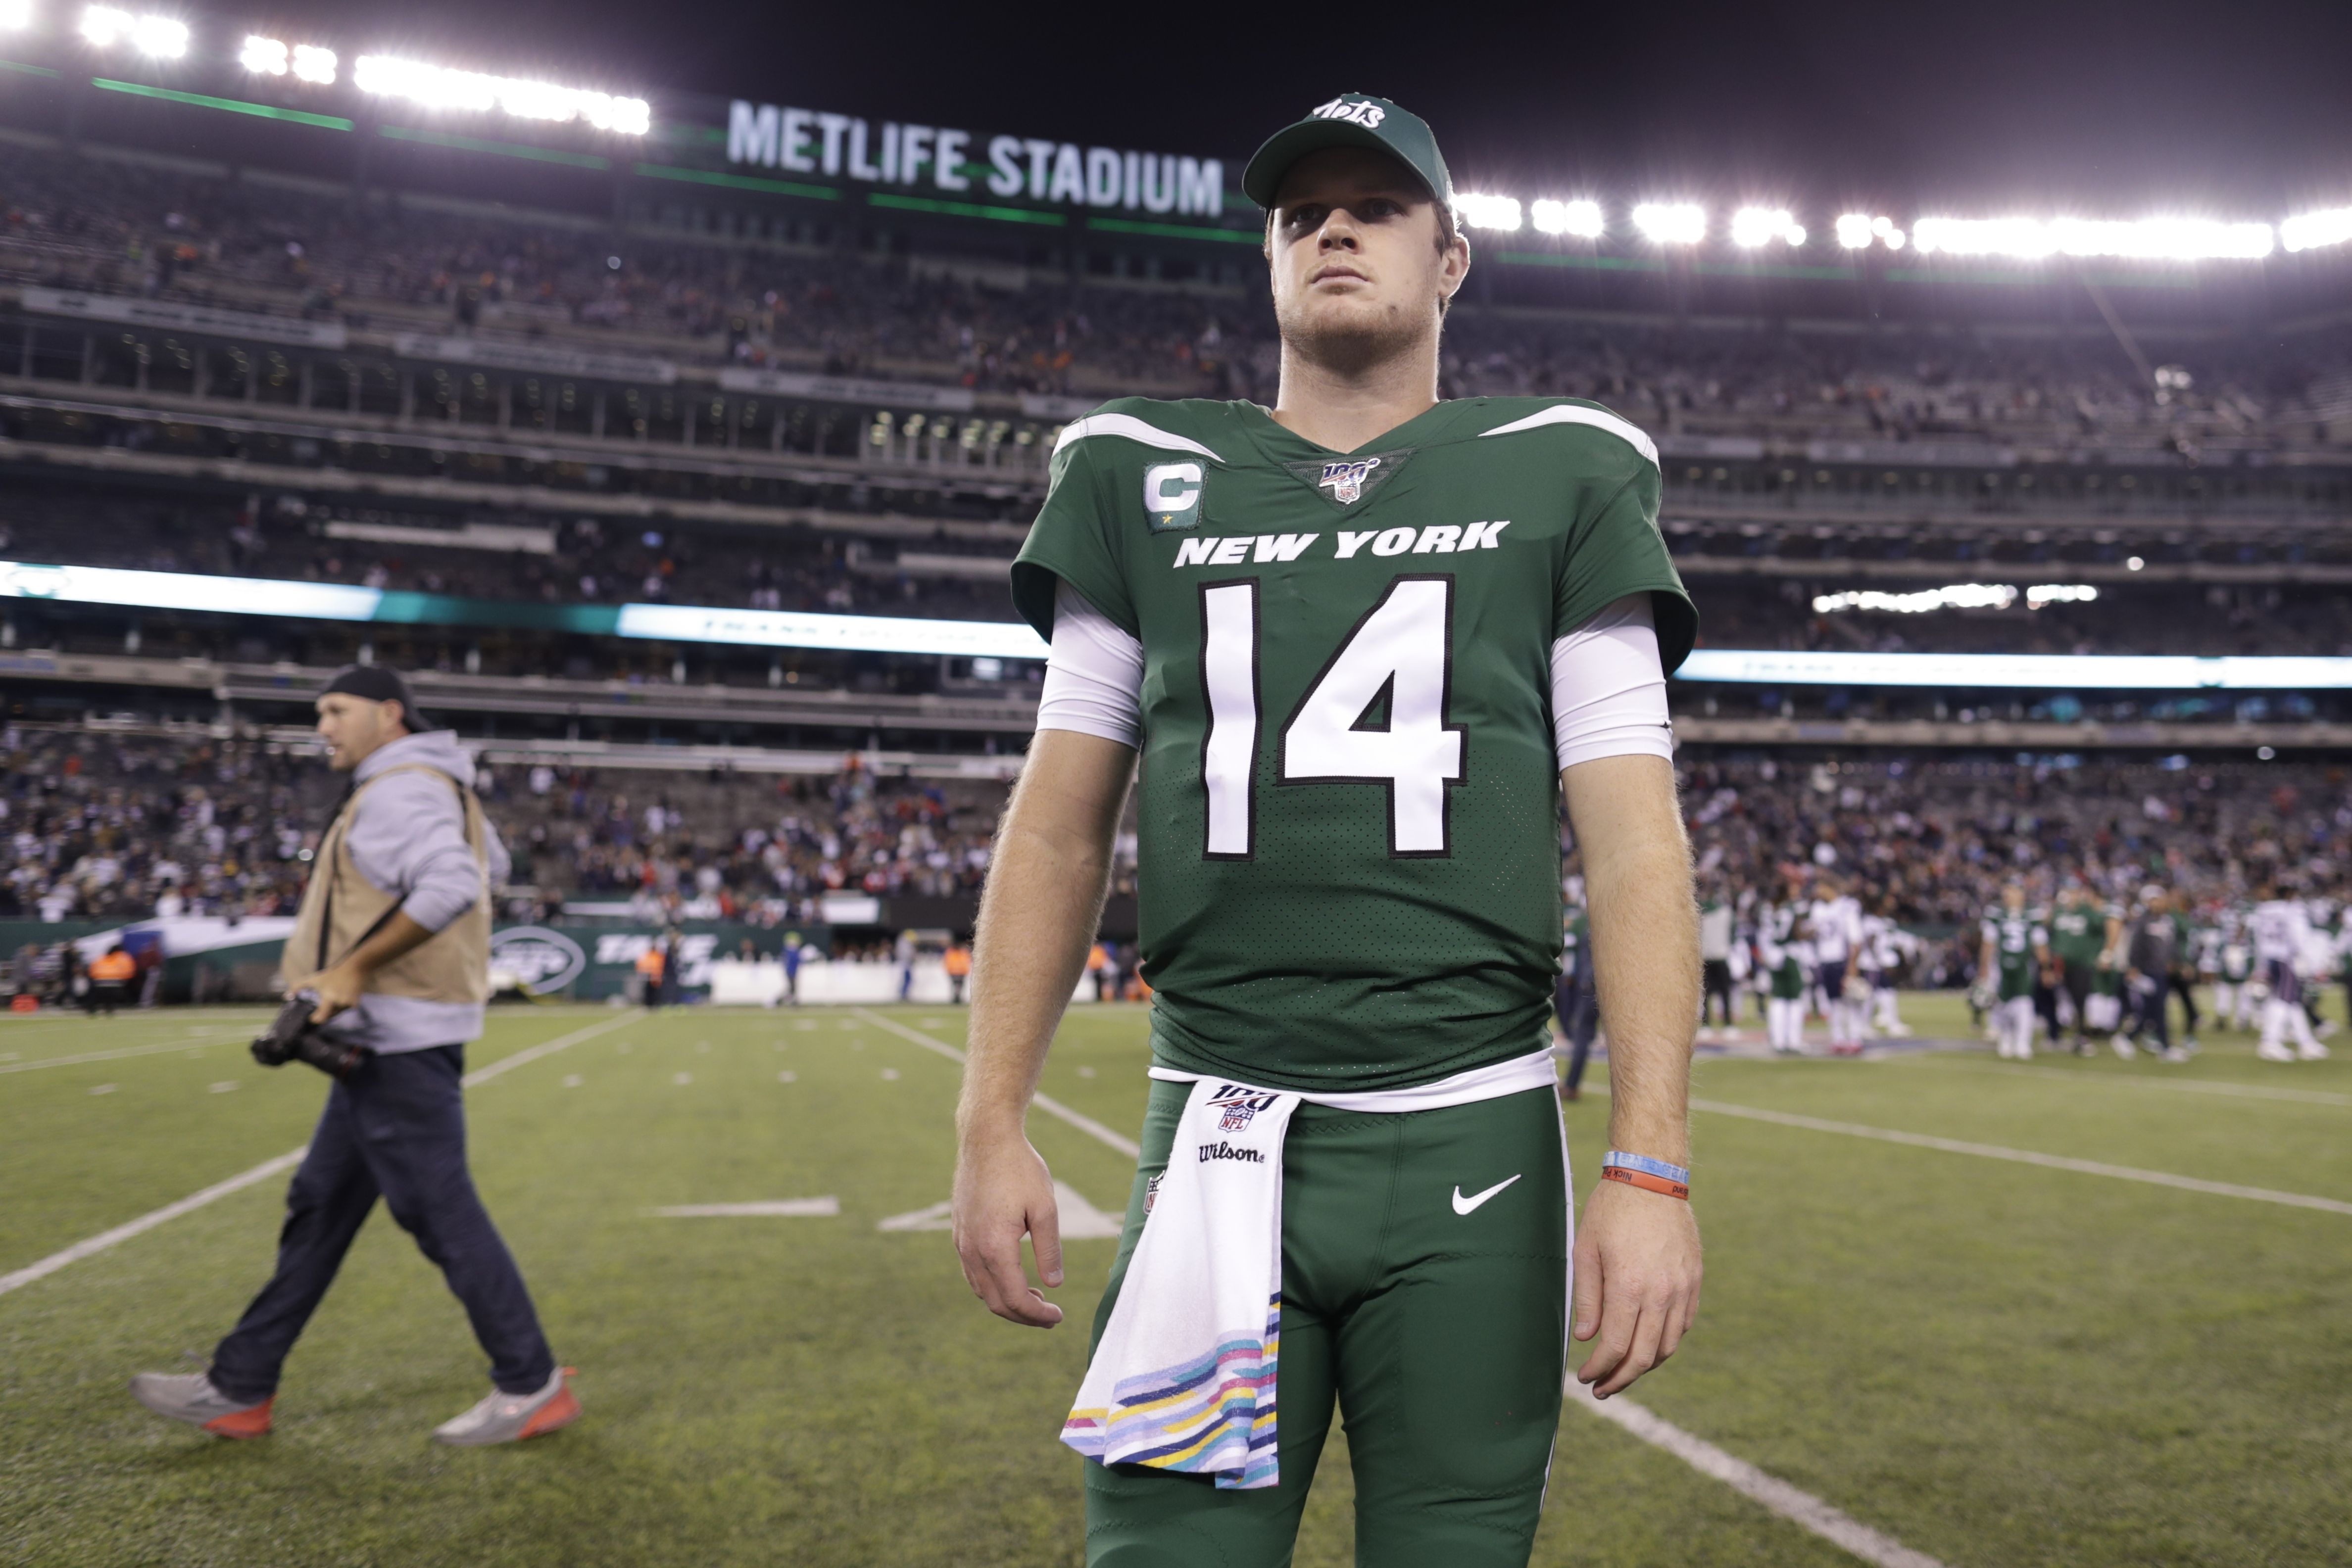 The Jets are upset ESPN aired Sam Darnold's mic'd up quote about 'seeing  ghosts' - The Boston Globe